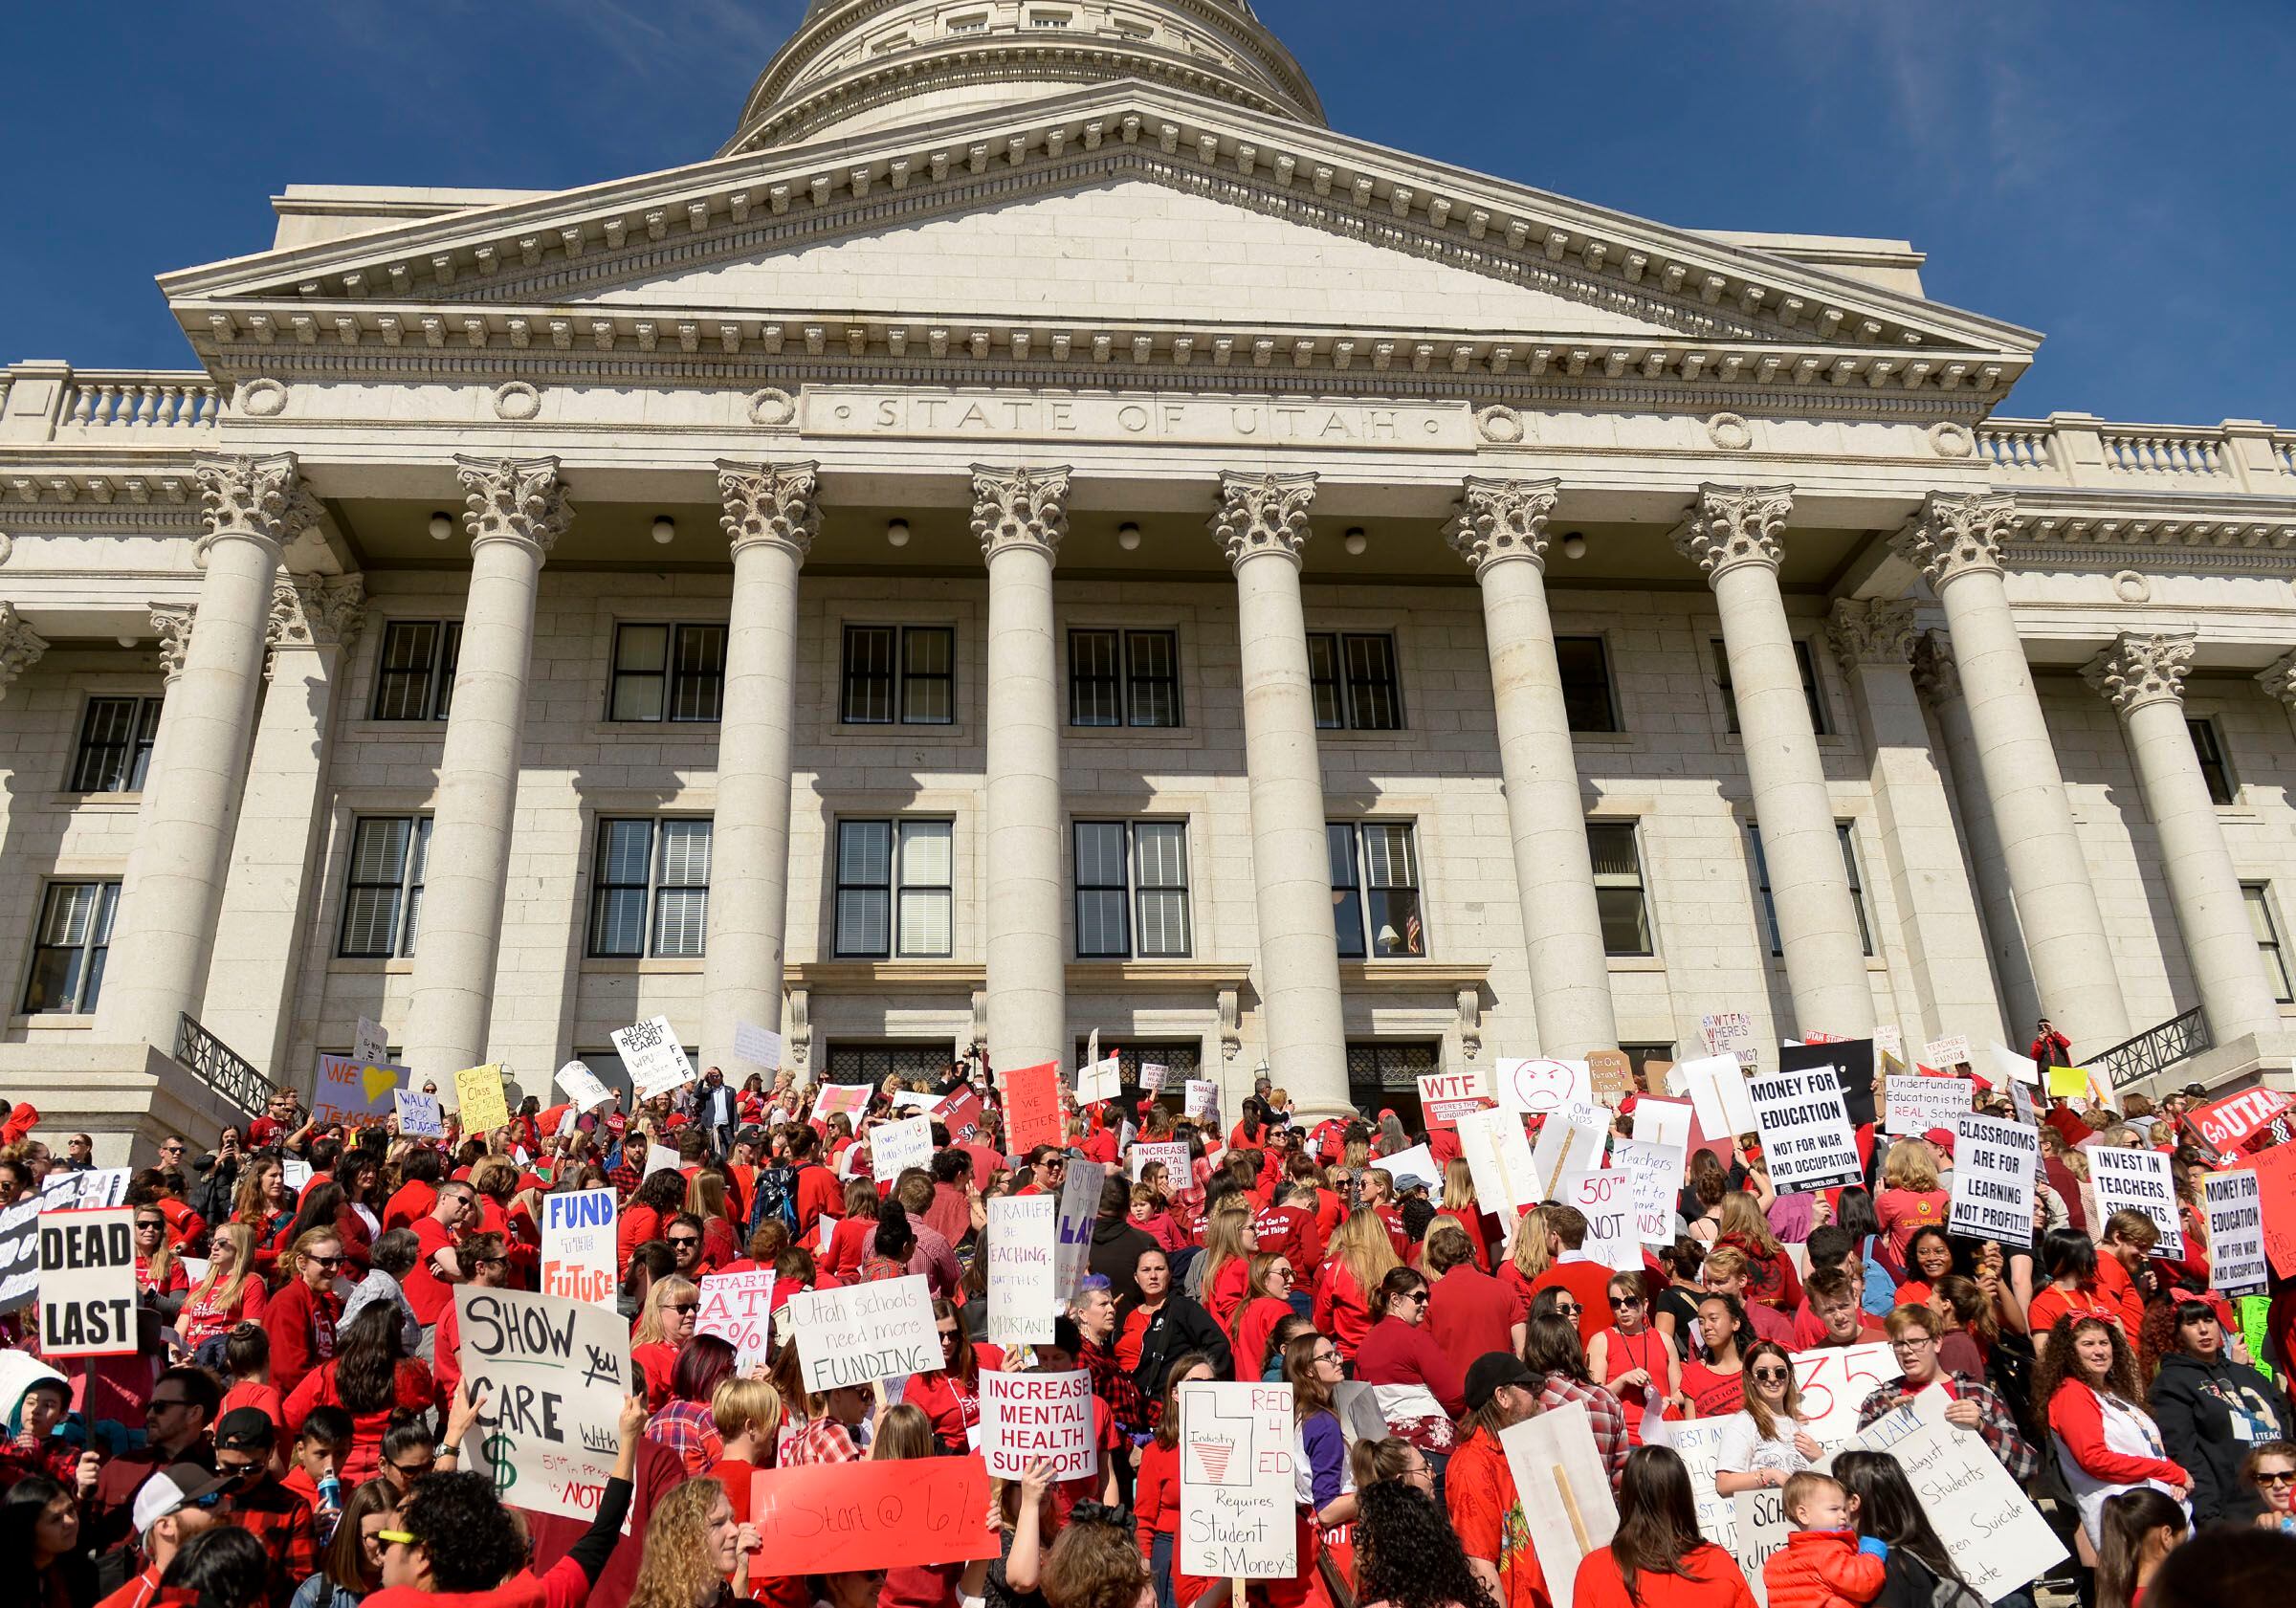 (Leah Hogsten  |  The Salt Lake Tribune) Teachers in Salt Lake City’s teacher union stage a walkout and rally at the Capitol to protest teacher pay in an effort to pressure the Utah State Legislature as it decides how much money it will allocate to the state’s education system Friday. Teachers began the rally at the Federal Building and walked up Capitol Hill to the statehouse for a rally in the rotunda, Feb. 28, 2020.